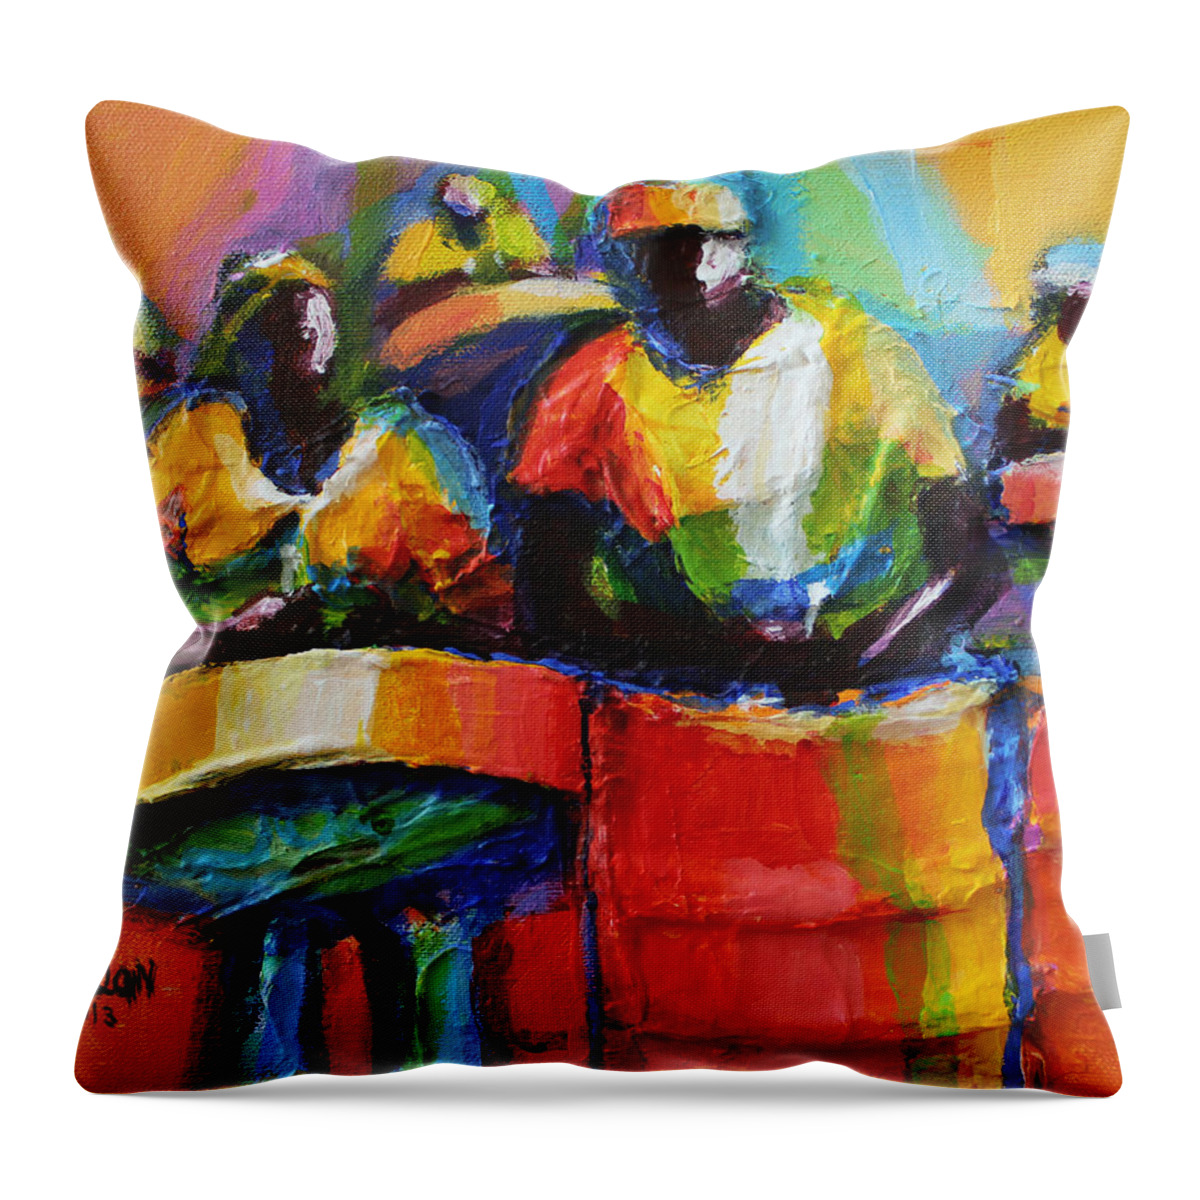 Abstract Throw Pillow featuring the painting Steel Pan by Cynthia McLean